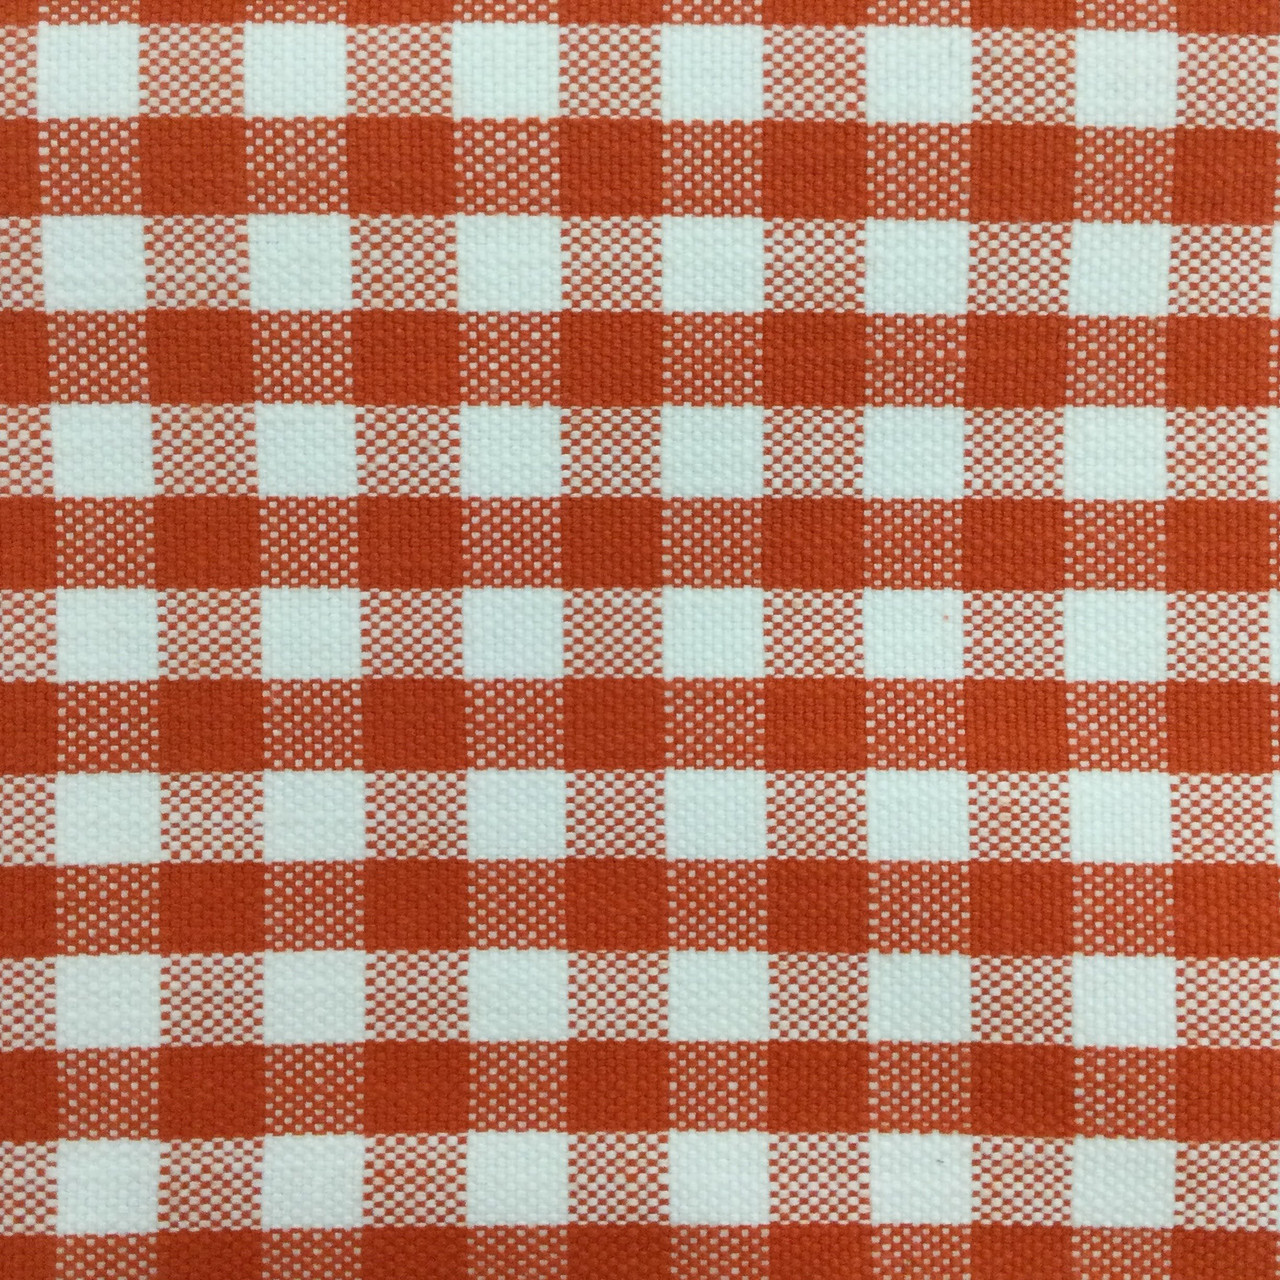 Checked Plaid Fabric in Orange and White, Upholstery / Slipcovers, Medium  Weight, 54 Wide, By the Yard